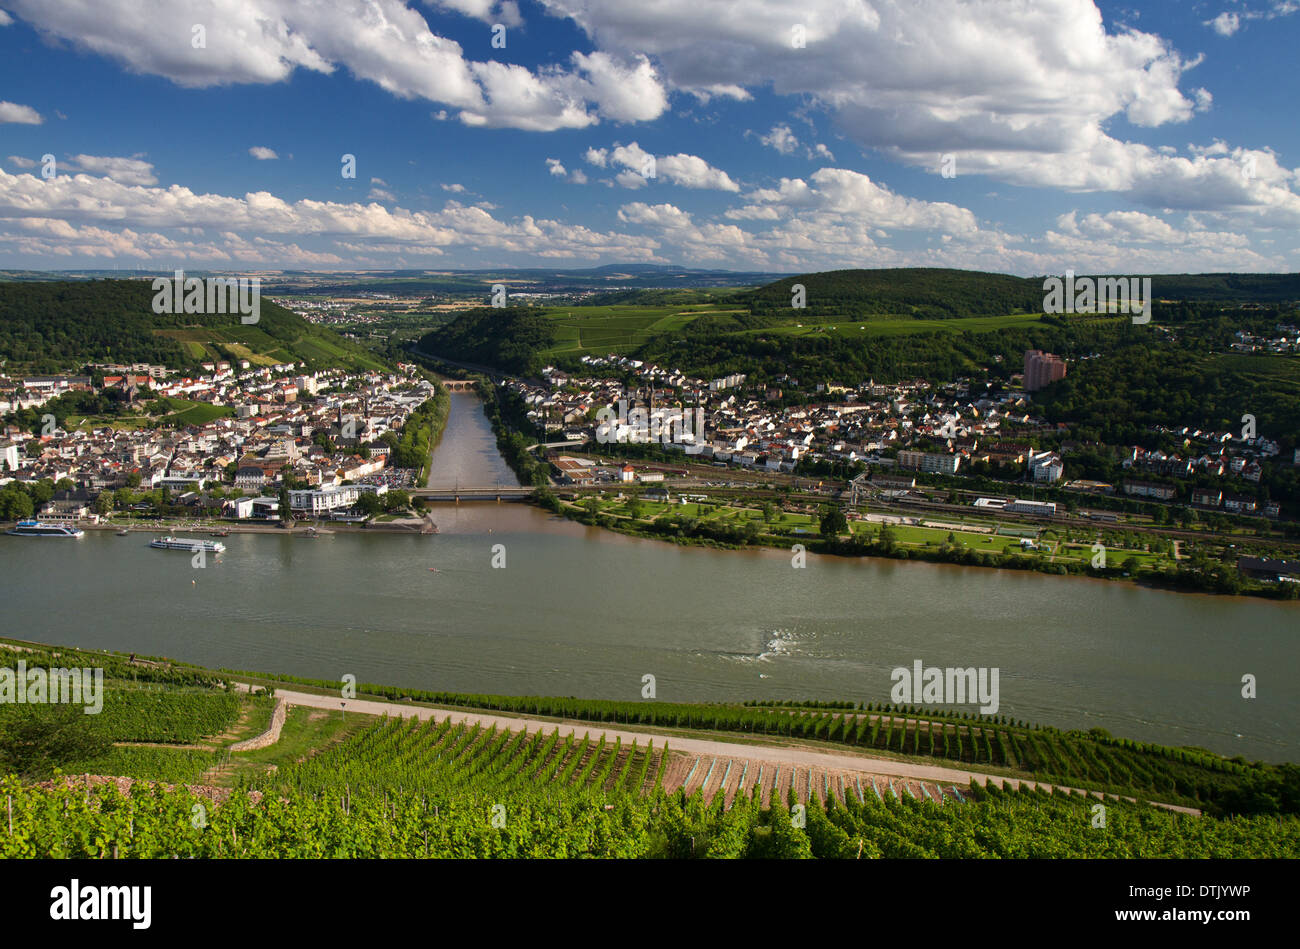 Viewpoint Naheblick above the Rhine Valley, Germany Stock Photo